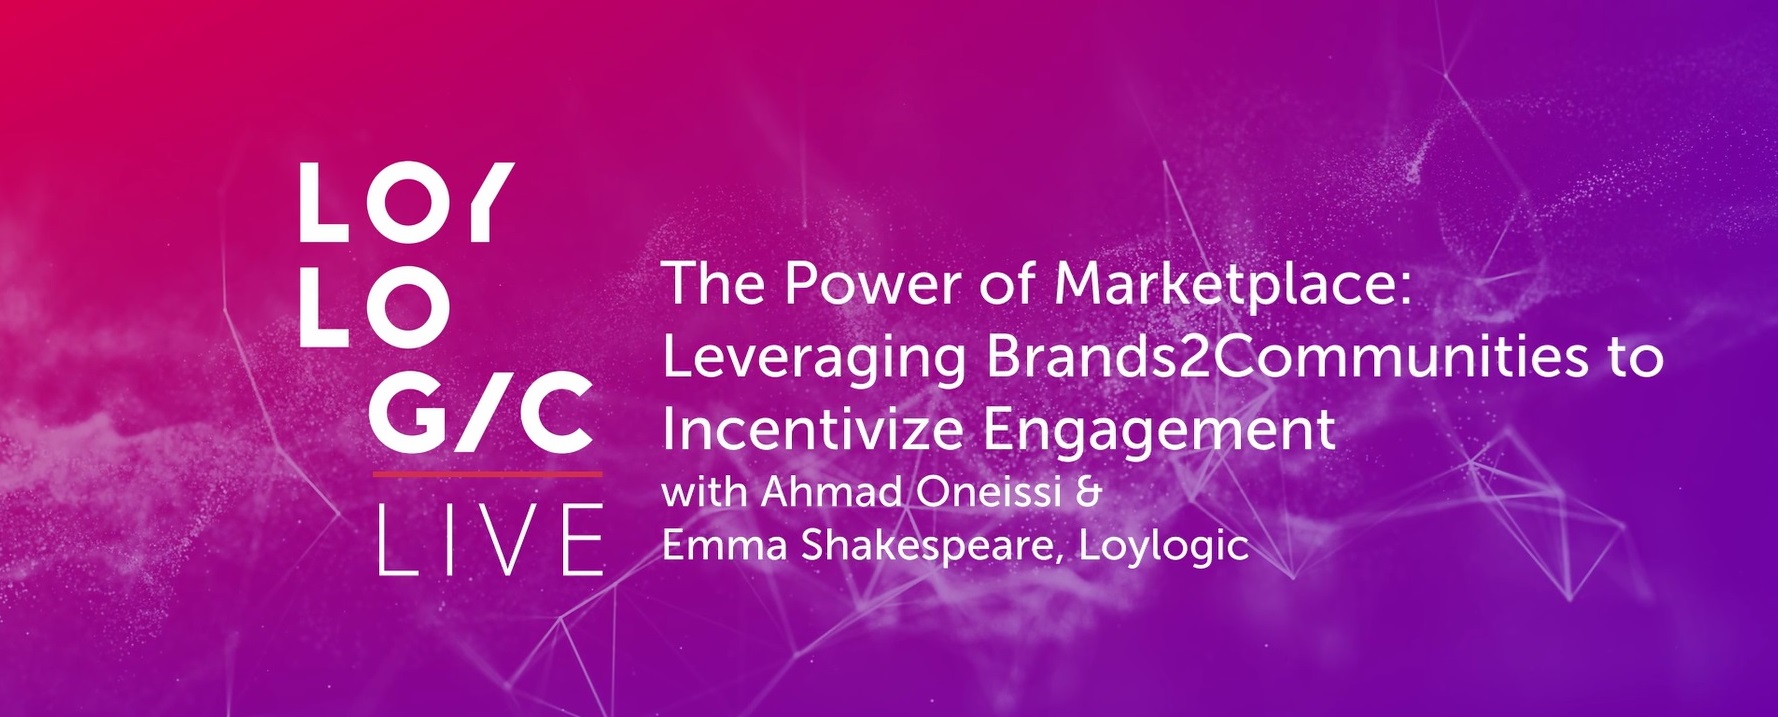 The Power of Marketplace: Leveraging Brands2Communities to Incentivize Engagement